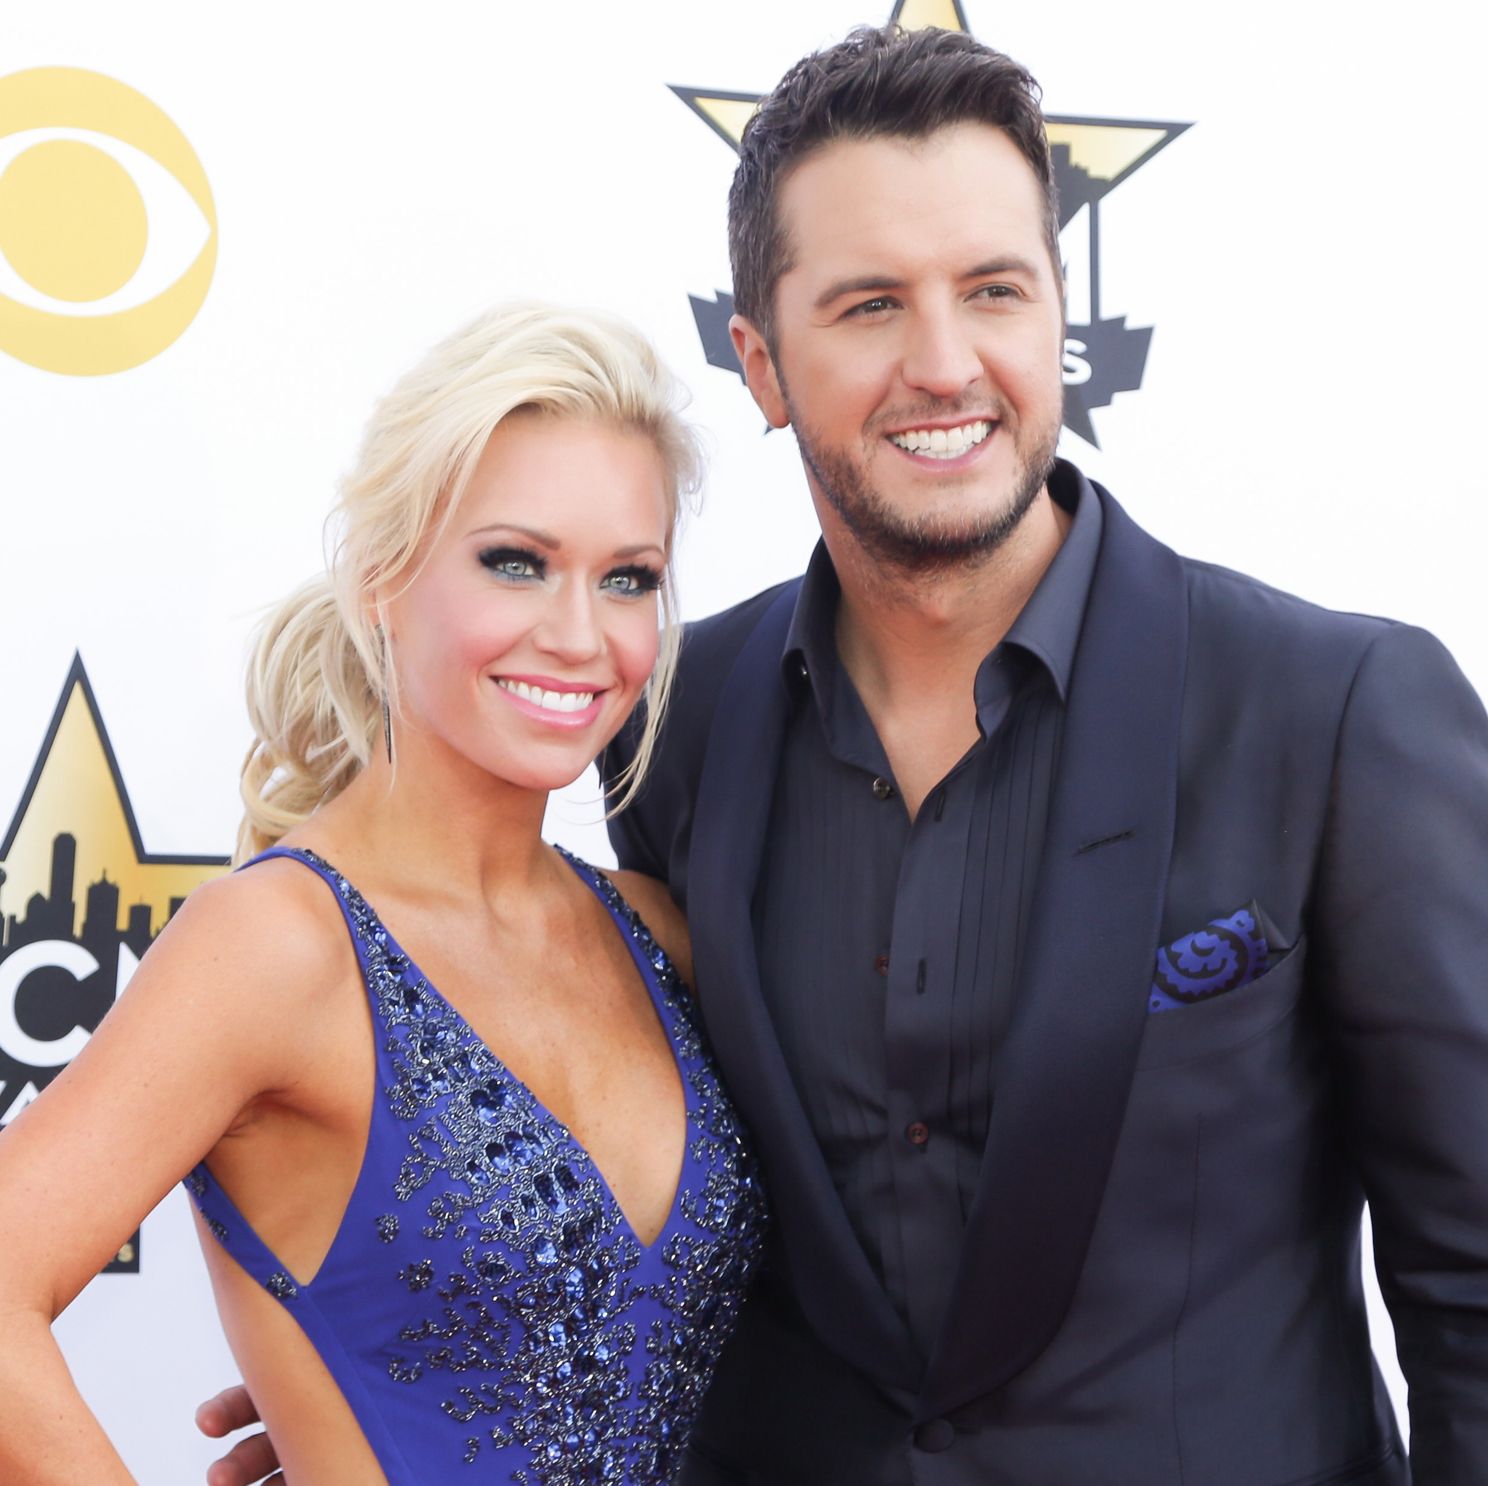 'American Idol' Fans Are Straight Up Shocked at Luke Bryan's Wife's NSFW Thong Instagram